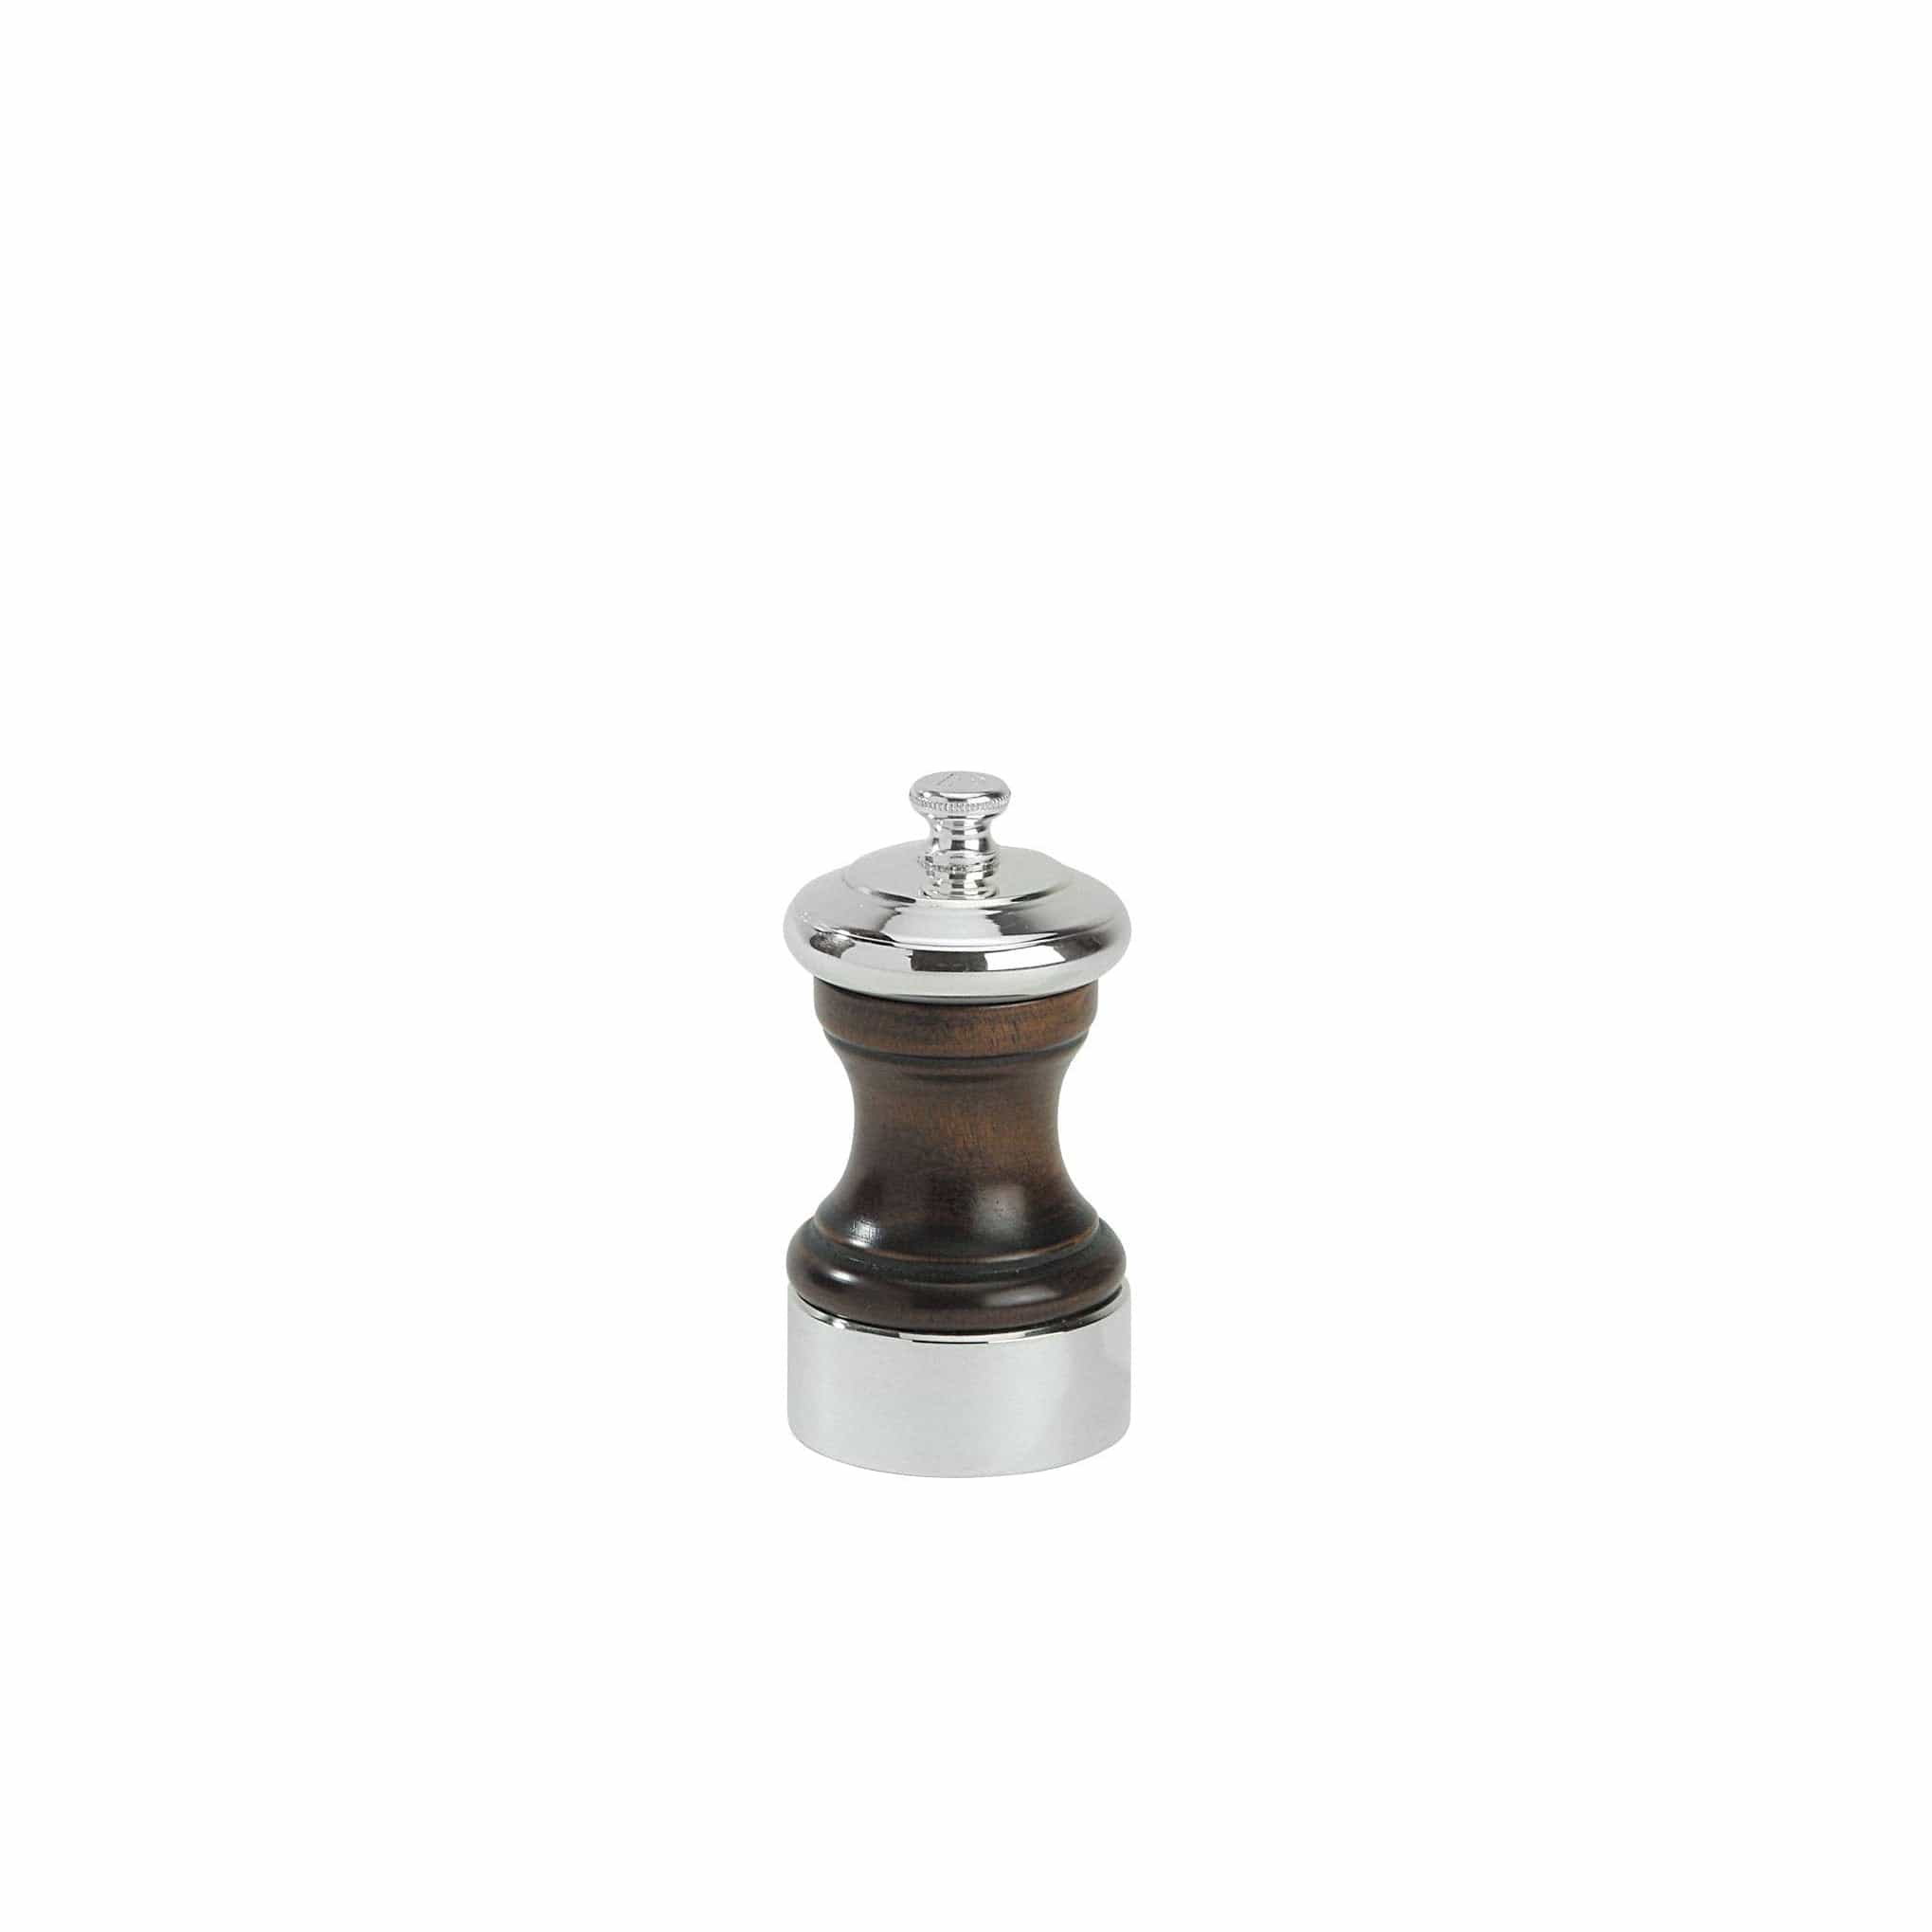 Peugeot Palace Pepper Mill Chocolate/Silber, 10 cm